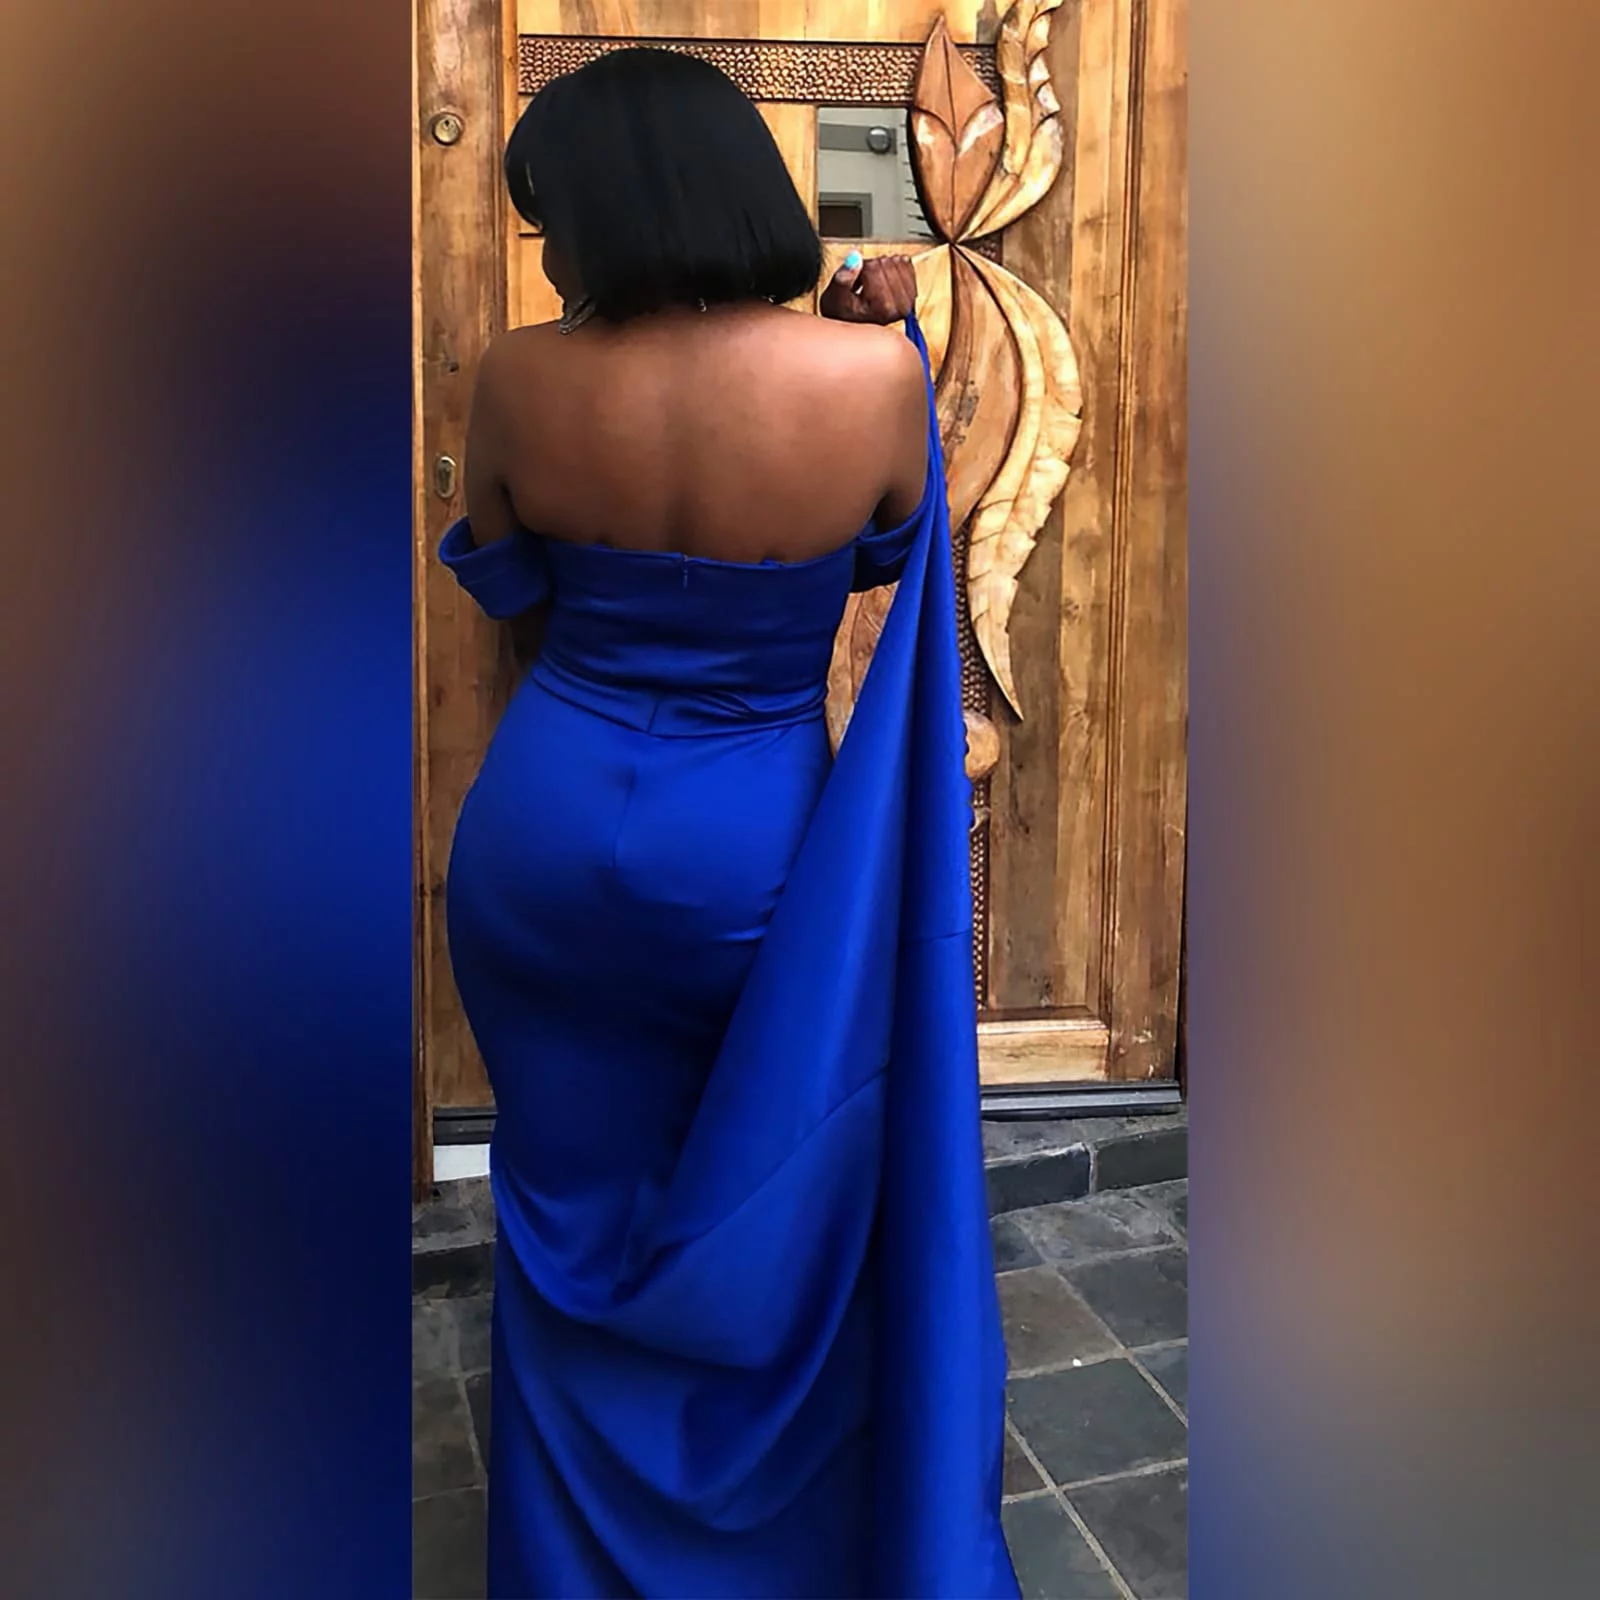 Simple royal blue soft mermaid dress 6 a simple royal blue soft mermaid dress, created for a debutantes ball. With a modern off-shoulder neckline and off-shoulder short sleeves. A belt effect to enhance the waist and a train for a touch of drama.